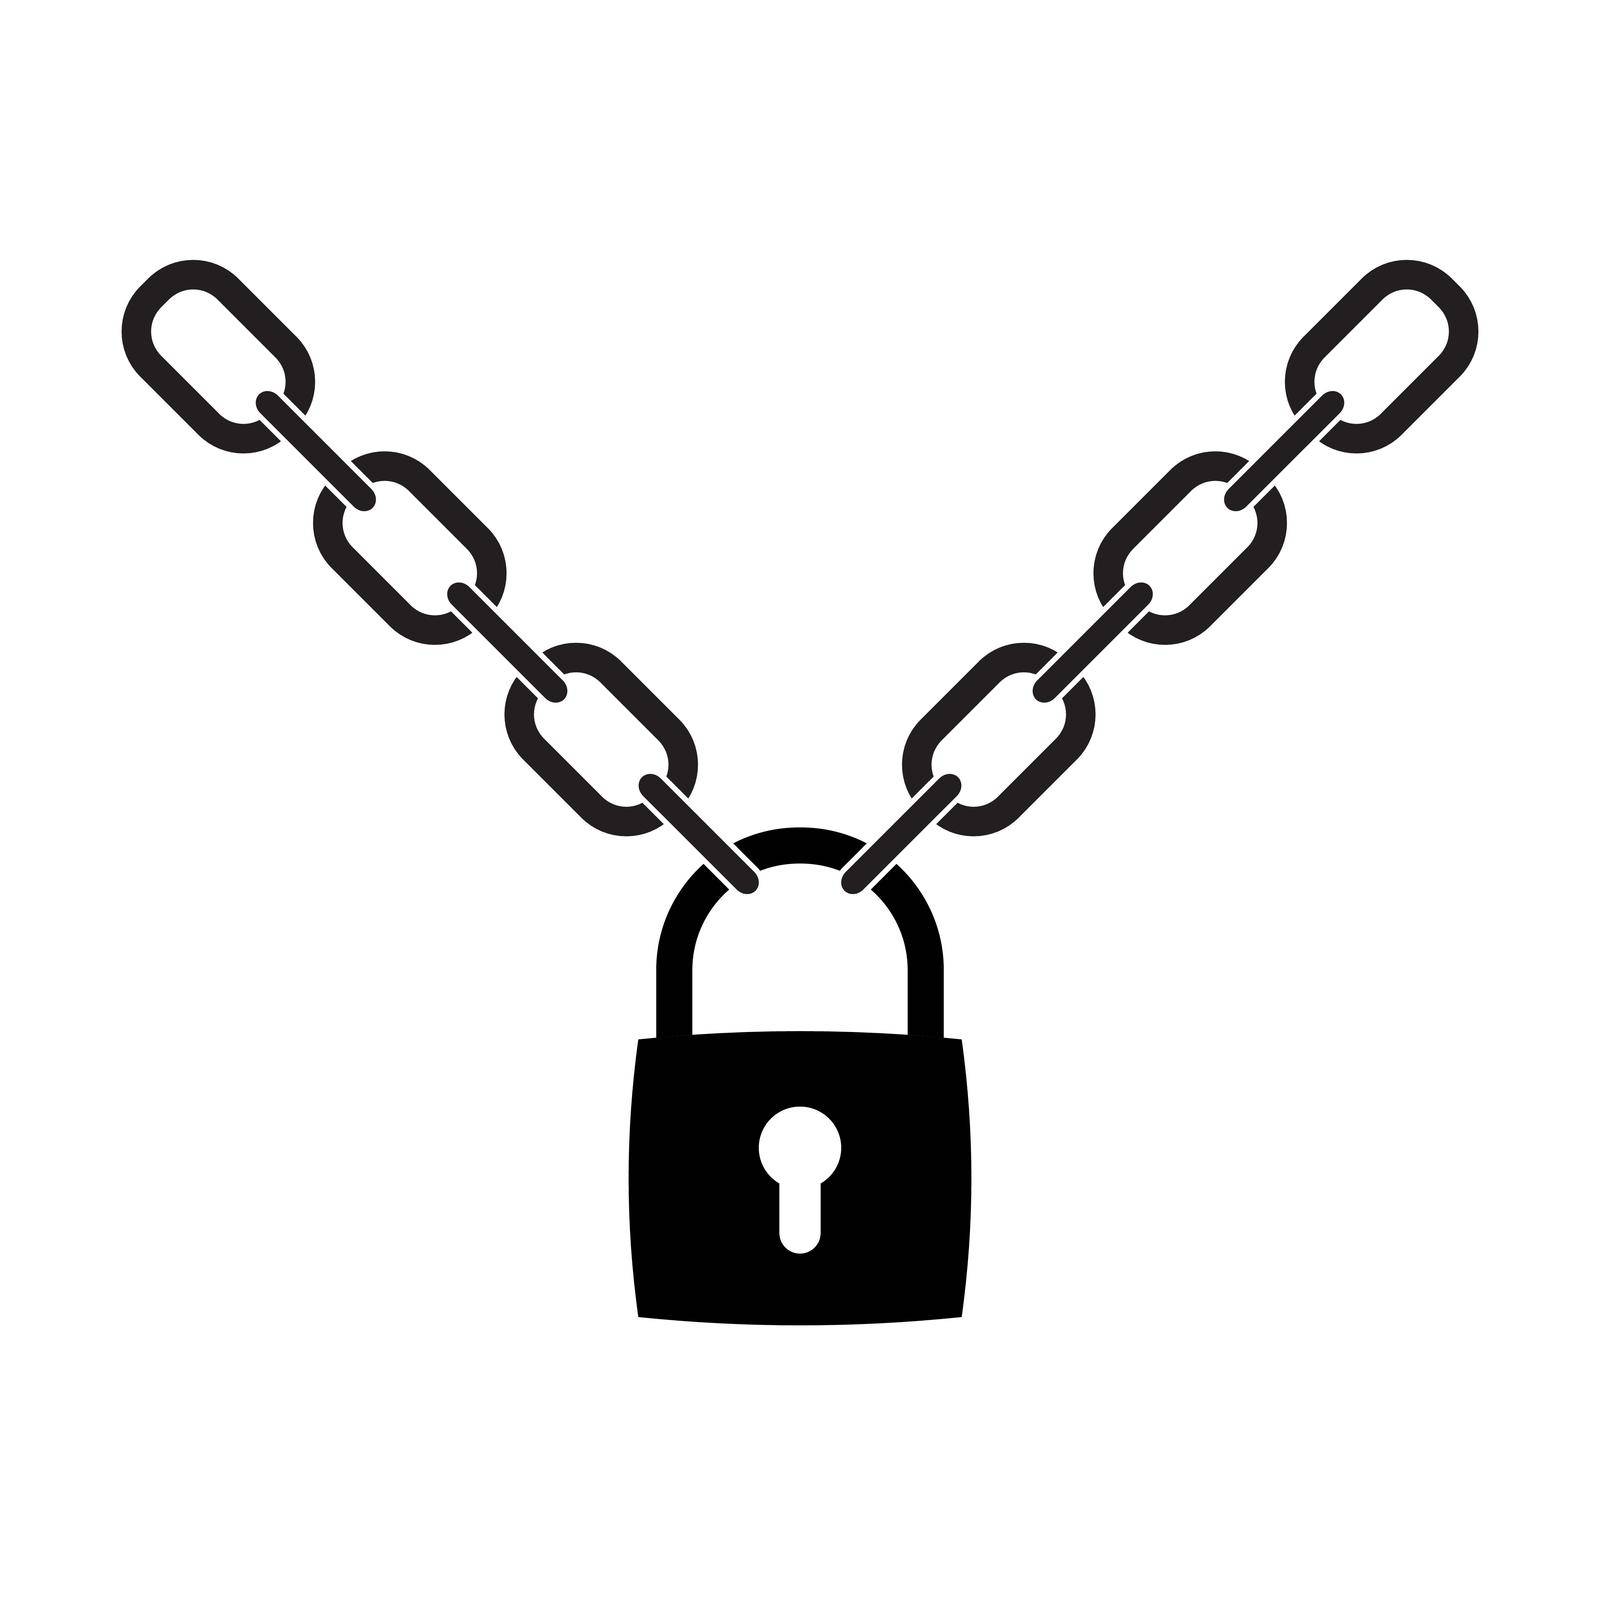 illustration of chain and padlock silhouette